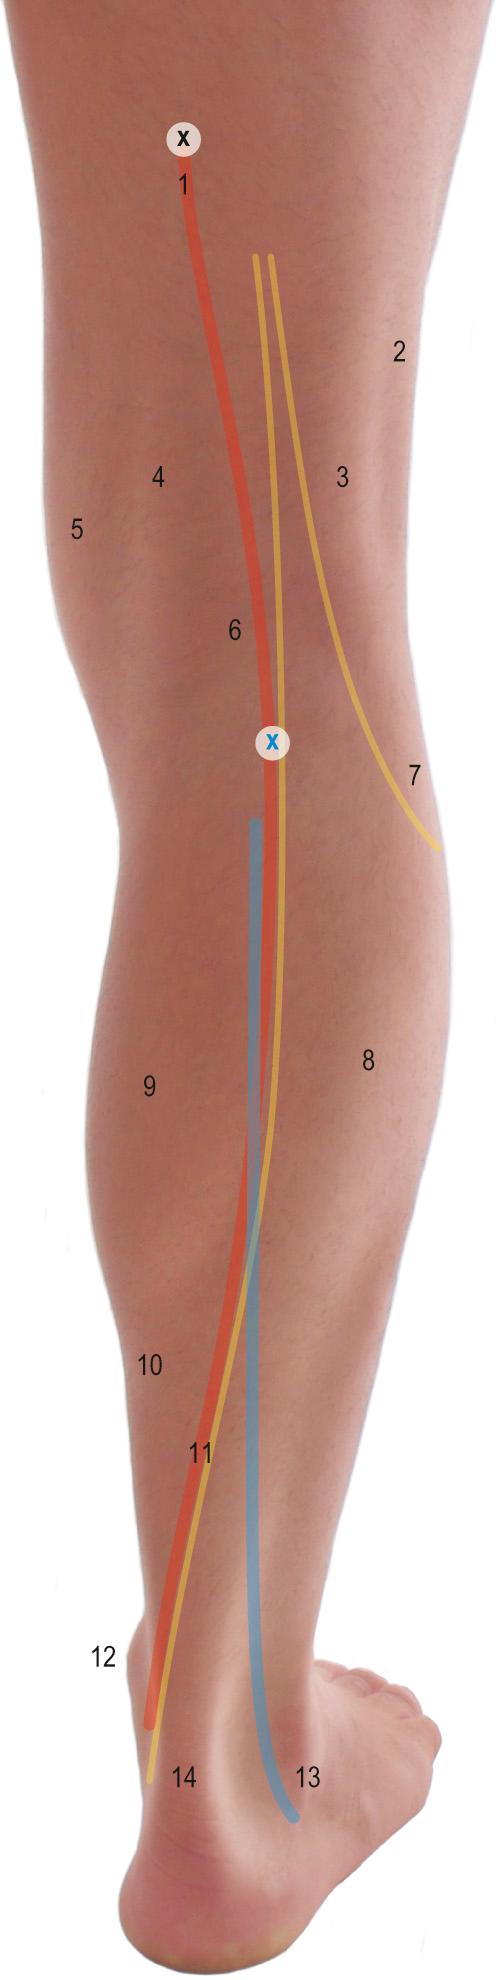 Fig. 82.1, The posterior aspect of the knee and leg. Key: 1, popliteal artery: passing from a point (black X) 2.5 cm medial to the posterior midline of the thigh at the junction of its middle and lower thirds to a point halfway between the femoral condyles/the midaxial line of the calf (blue X); 2, iliotibial tract; 3, tendon of biceps femoris and common fibular nerve located medially; 4, semimembranosus and semitendinosus; 5, gracilis; 6, popliteal fossa; 7, head of fibula; 8, gastrocnemius, lateral head; 9, gastrocnemius, medial head; 10, soleus; 11, posterior tibial artery and tibial nerve, which run from the midline of the calf at the neck of the fibula level to a point one-third of the way from the posterior border of the medial malleolus to the calcaneal tendon; 12, medial malleolus; 13, lateral malleolus and short saphenous vein passing posteriorly; 14, calcaneal tendon insertion on to calcaneus.